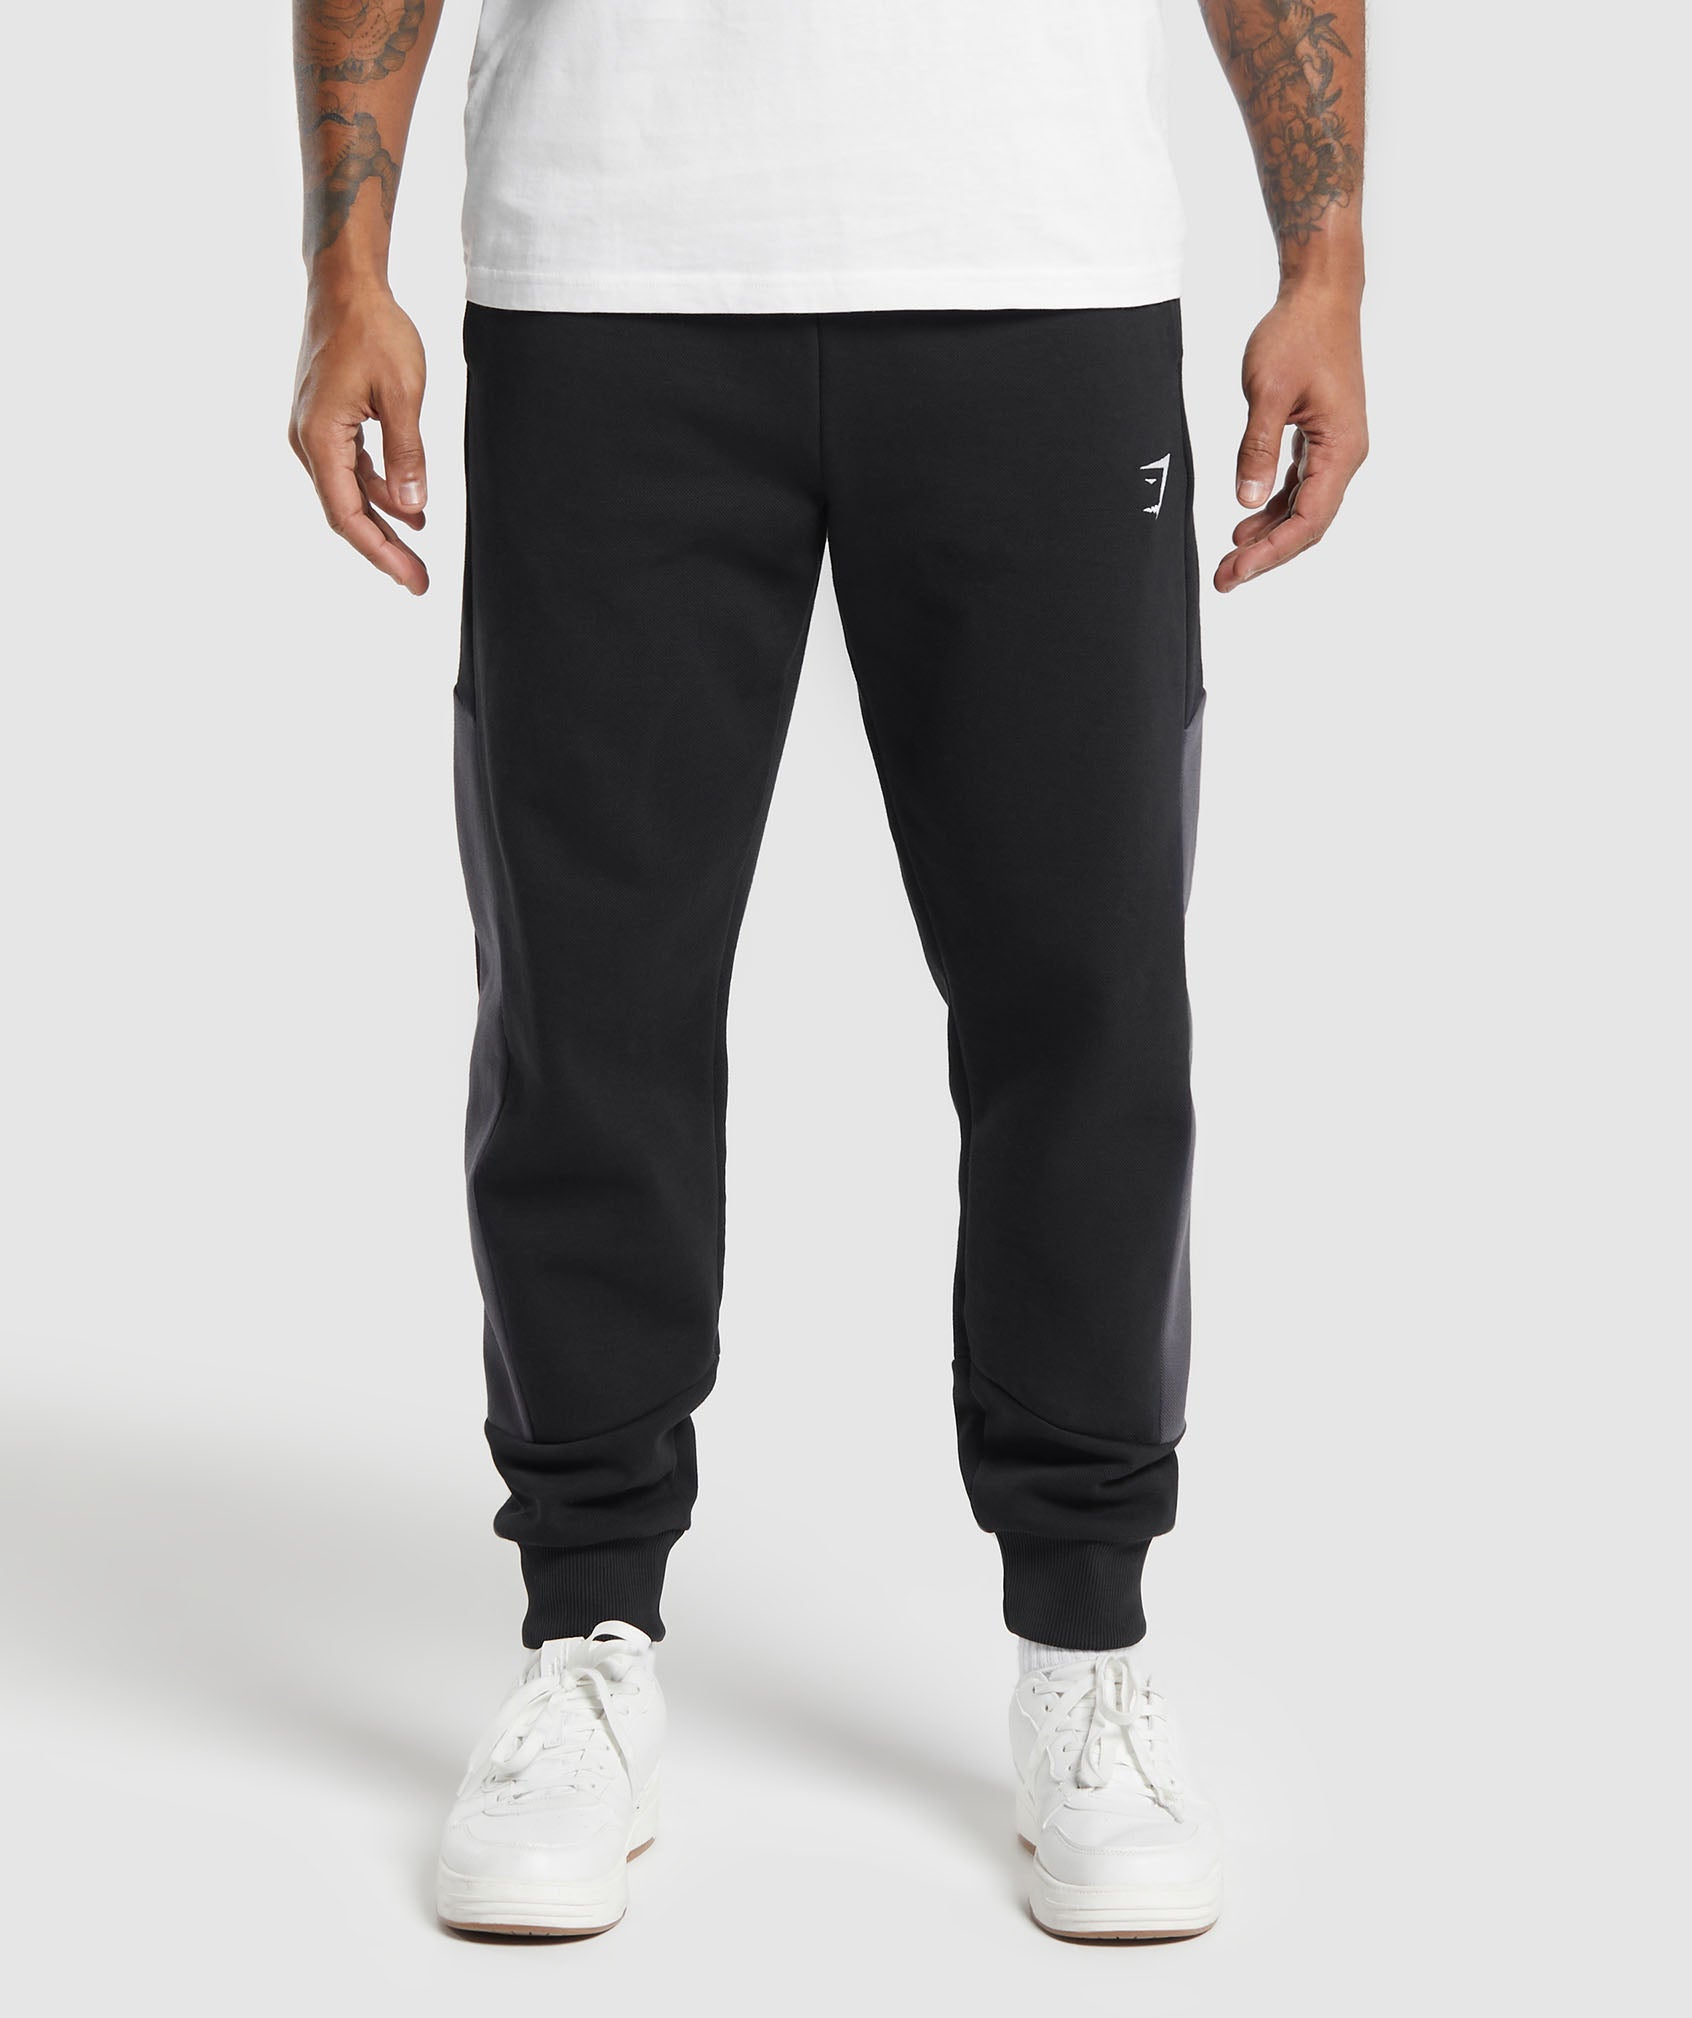 Pique Joggers in Black/Onyx Grey - view 2